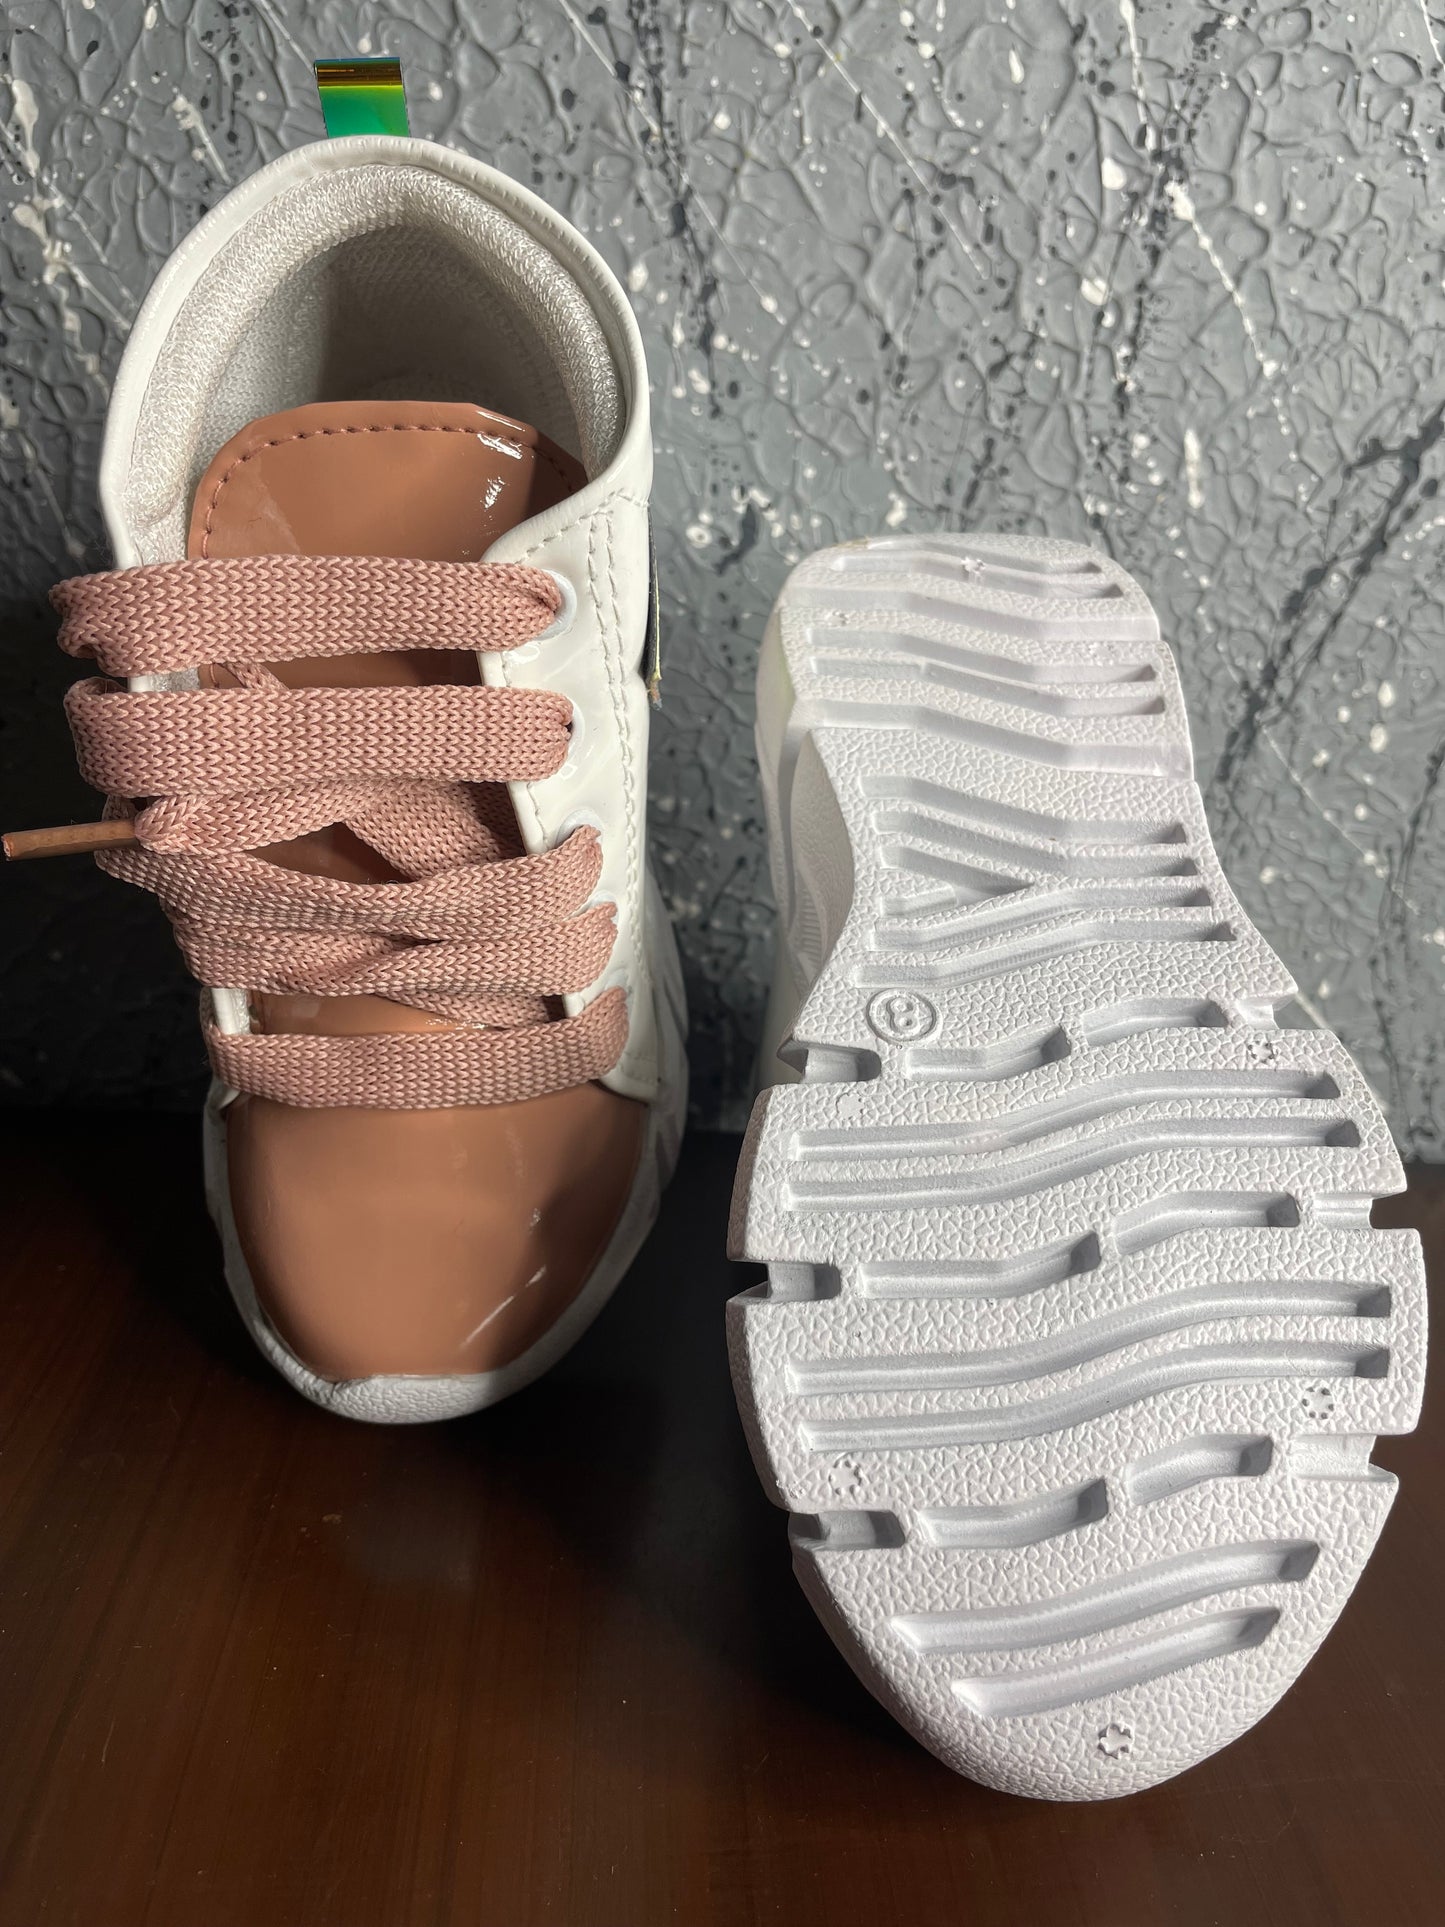 Toddler's Peach-Accented Fashion Shoe